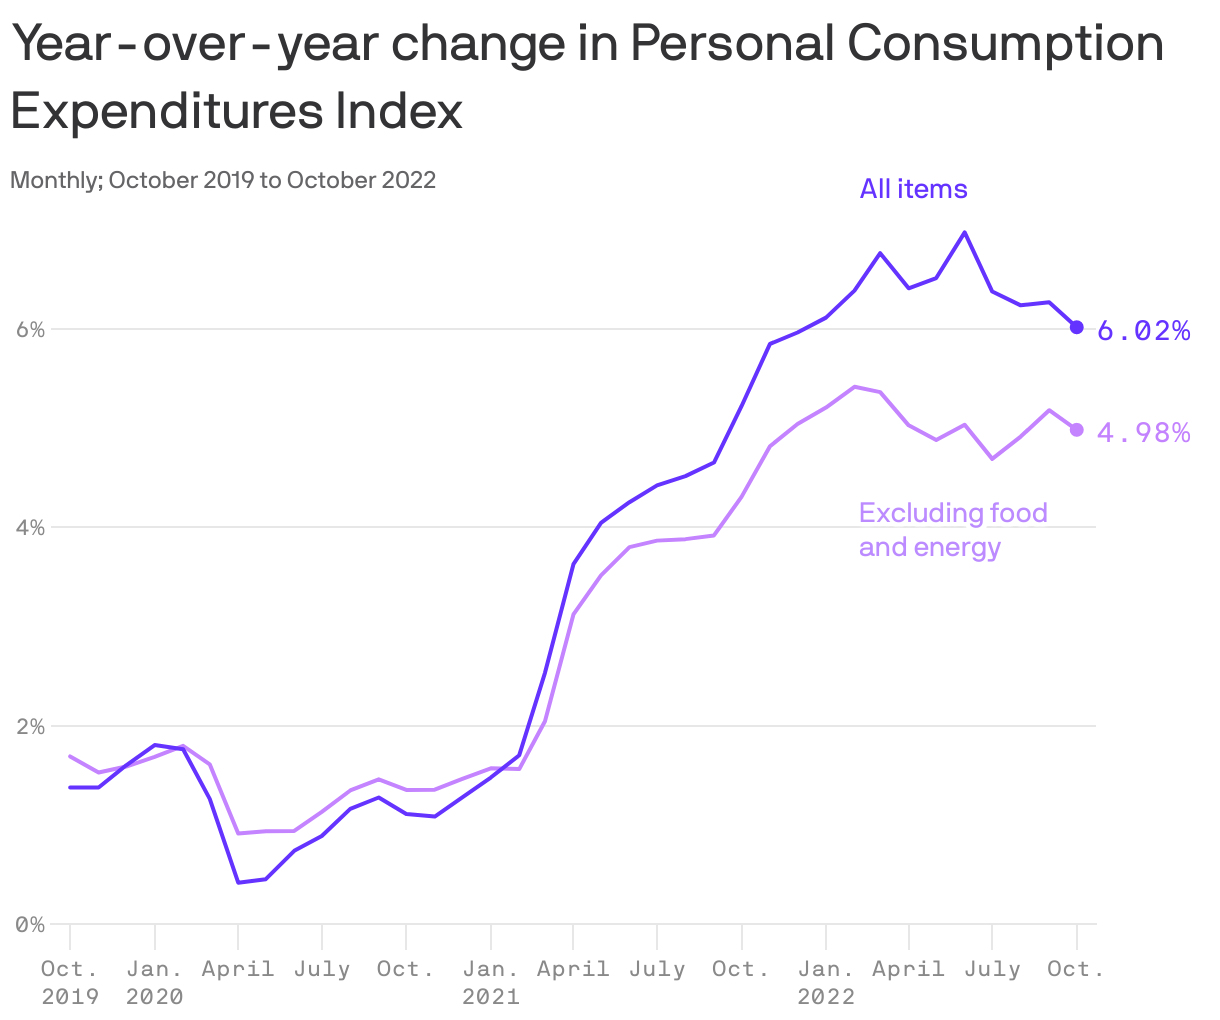 Year-over-year change in Personal Consumption Expenditures Index